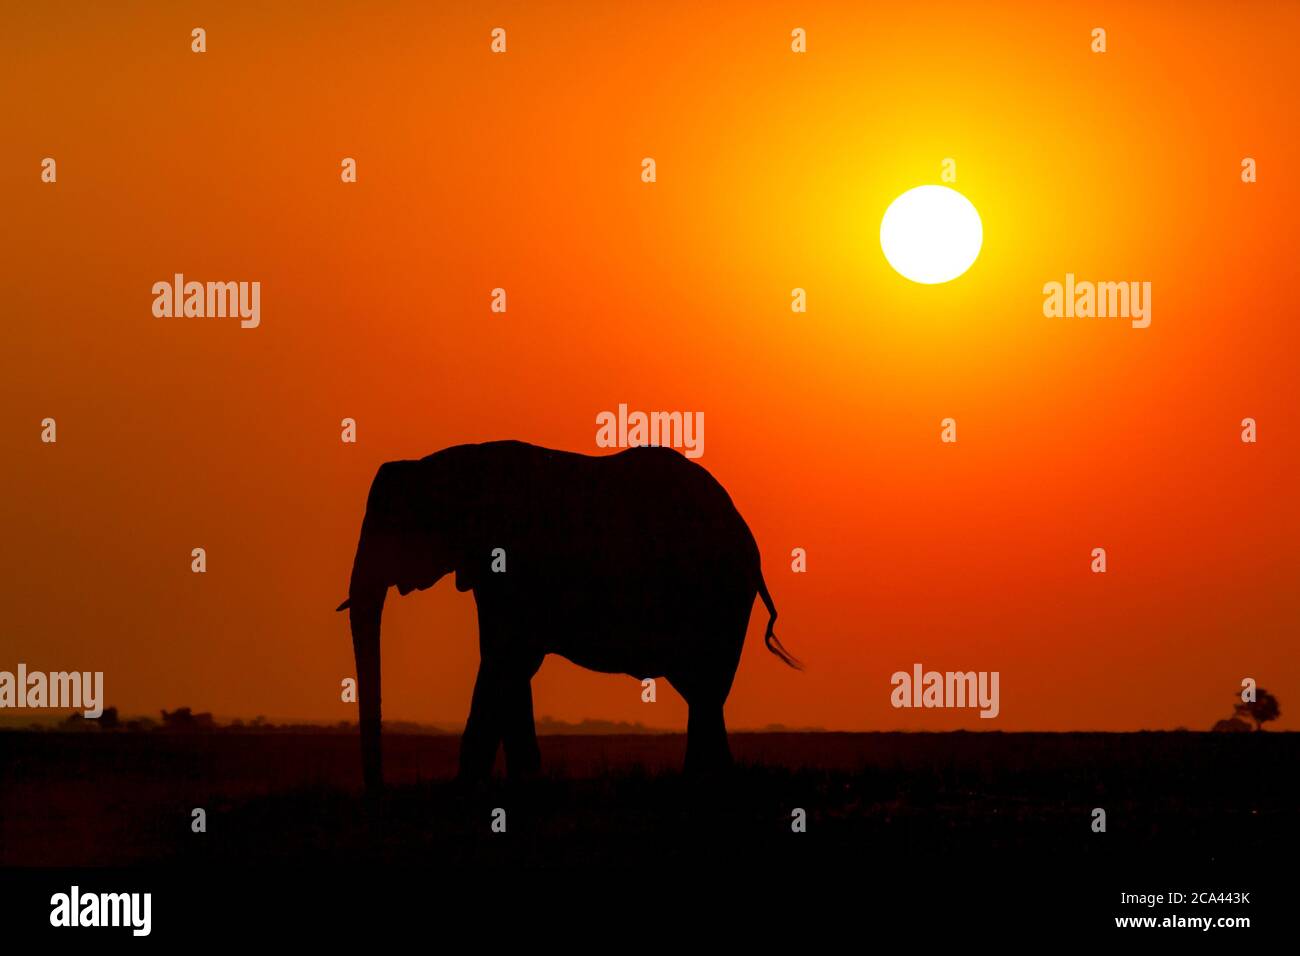 African elephant silhouette at sunset Stock Photo - Alamy